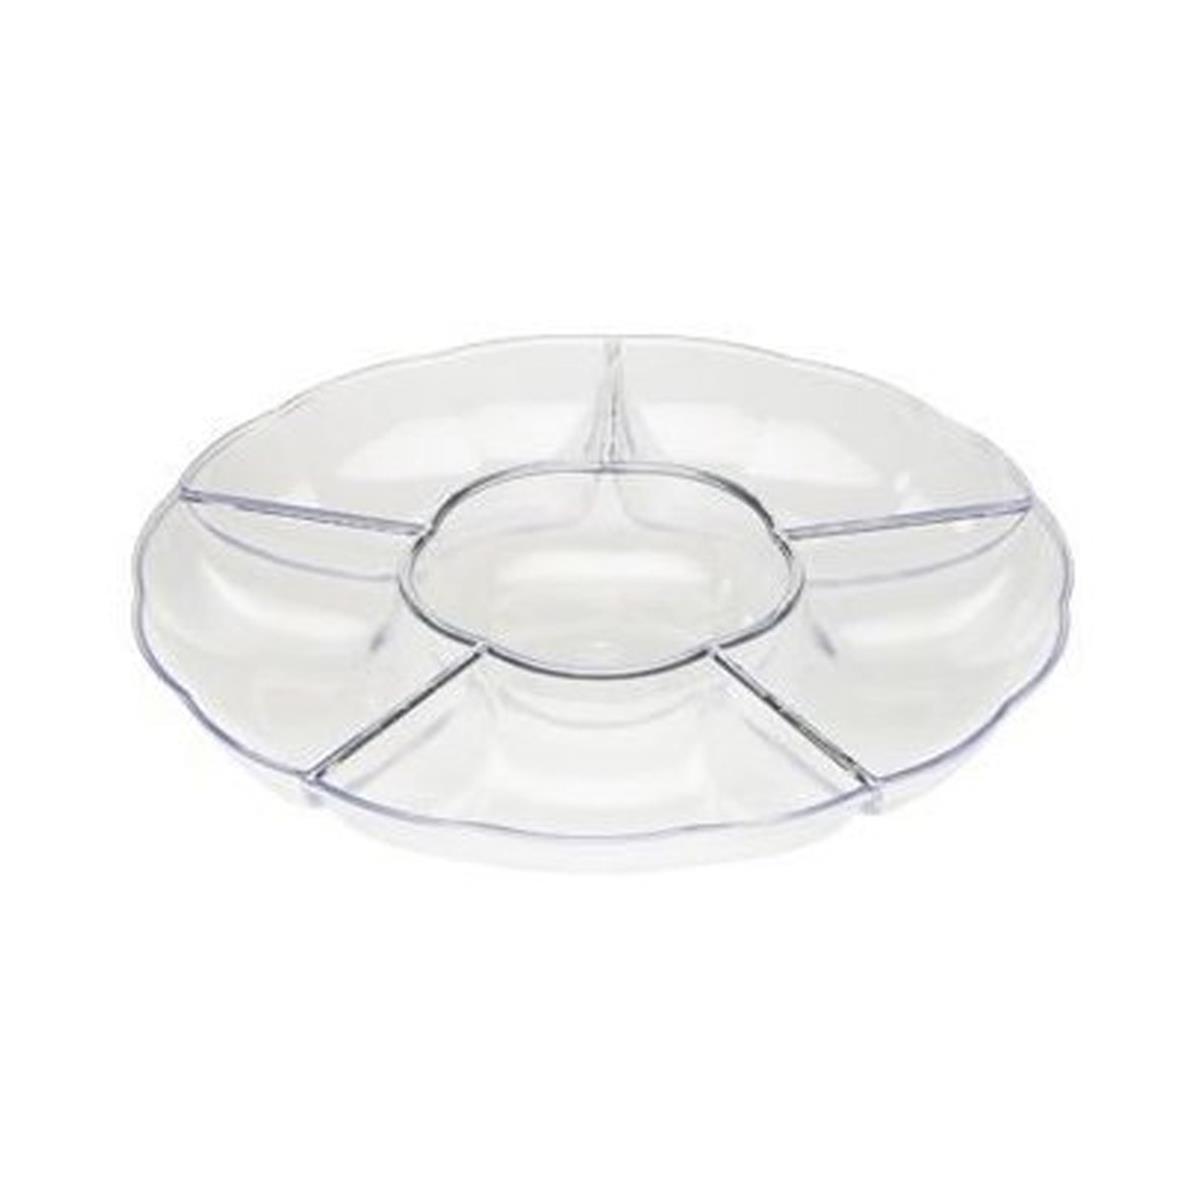 Mpi10126c Pe 12 In. Clear Sovereign Sectional Tray - Case Of 12